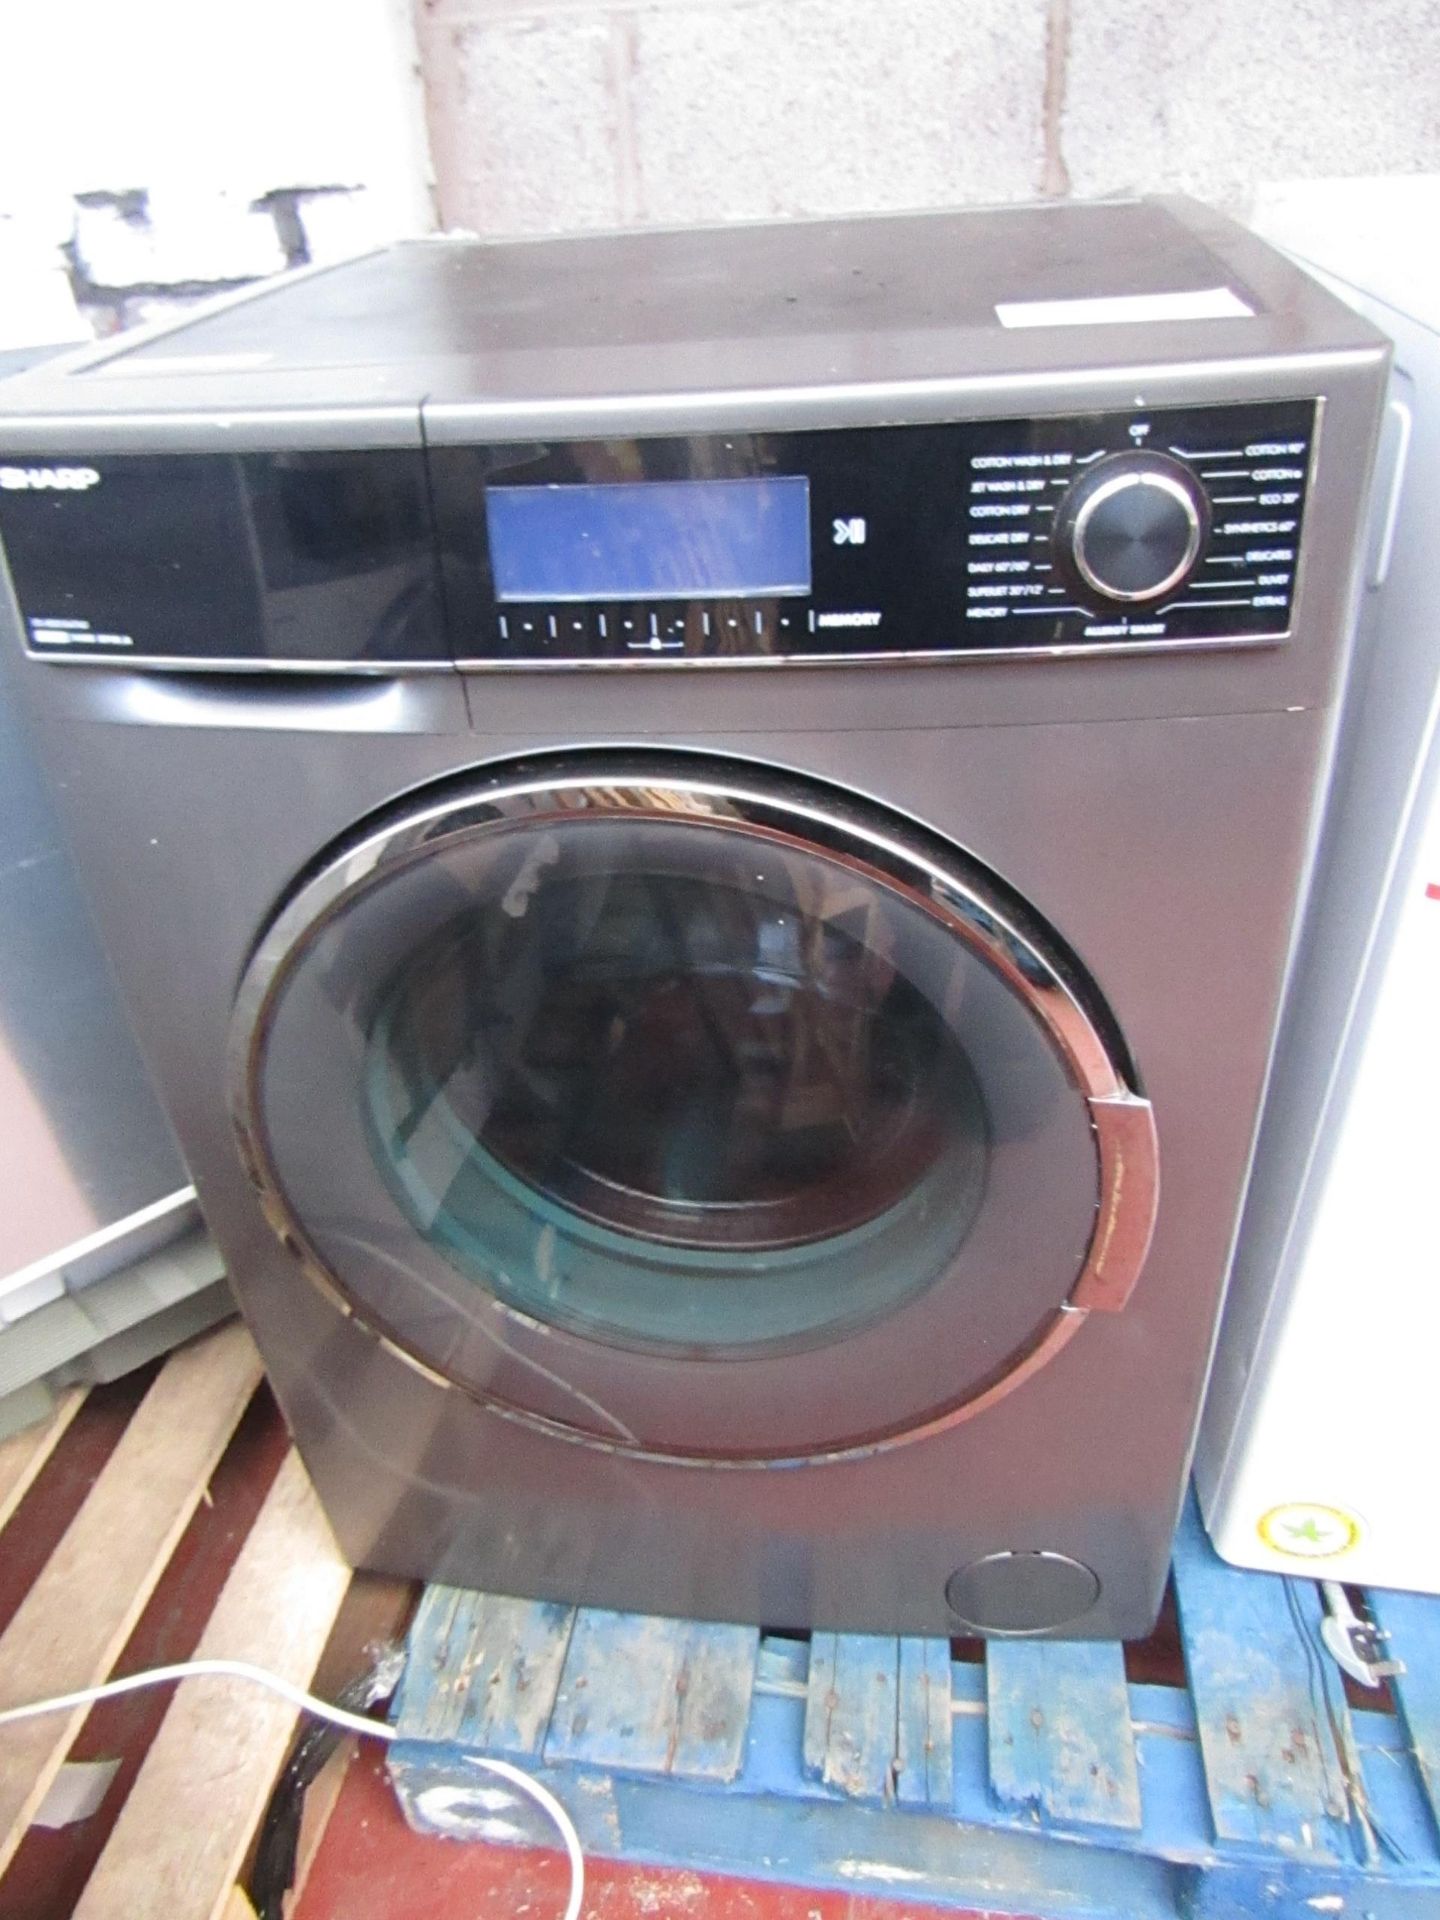 Sharp 10/6kg washer / dryer, powers on but is unresponsive. Heat untested.